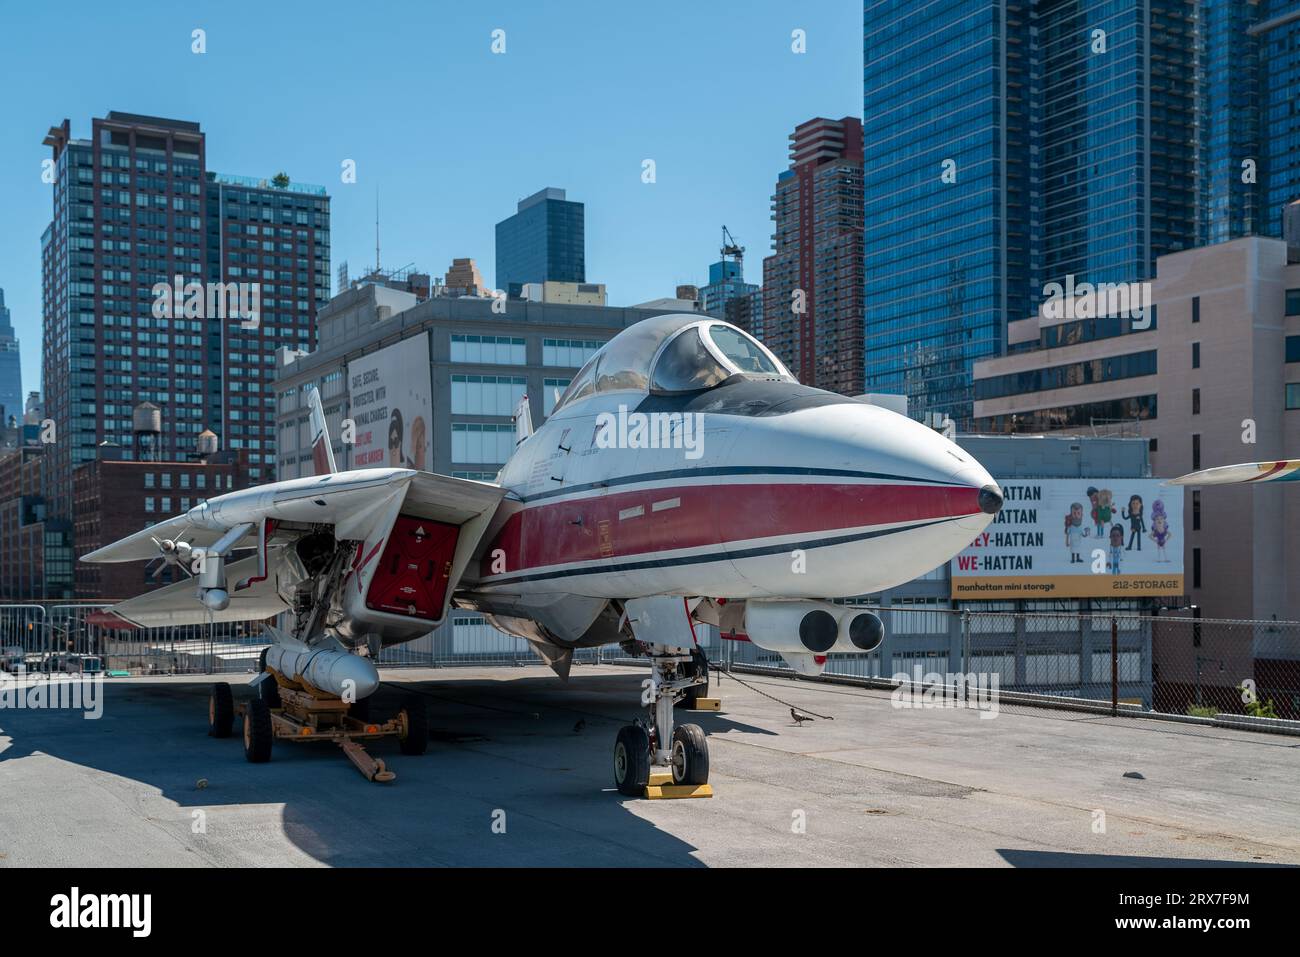 15.09.23. USA, NYC. Famous aricraft in the Intrepid sea, air & space museum.  Iconic Airplanes exhibition at East river, Manhattan. Stock Photo